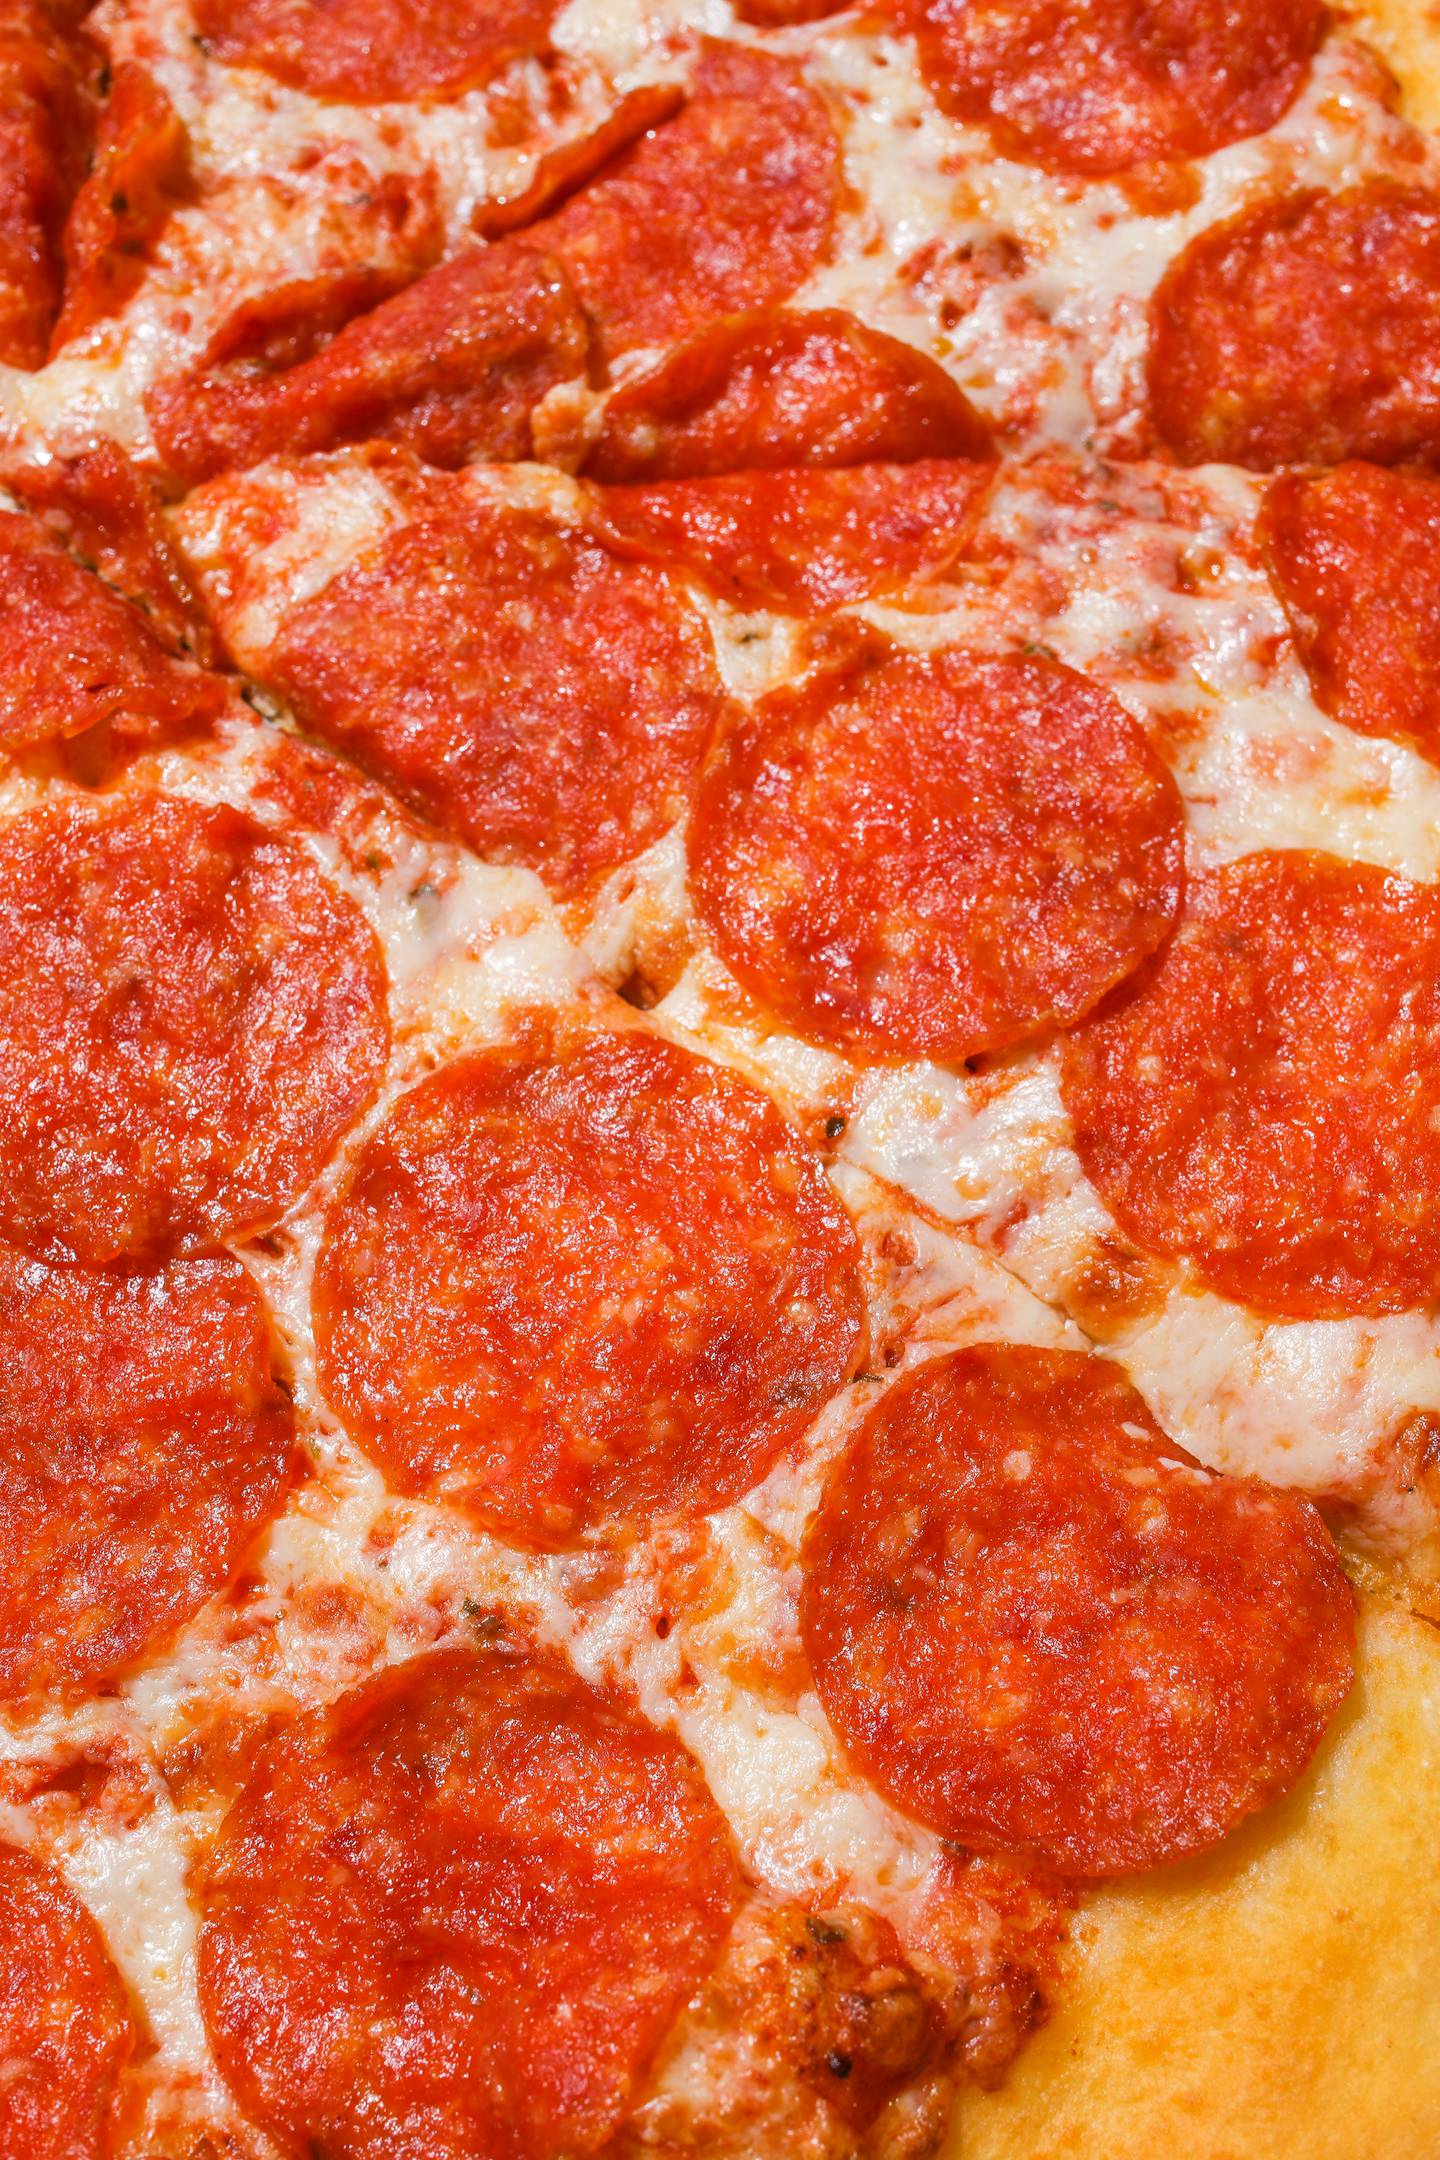 Cheesy Pepperoni Pizza In Close Up View 4109076